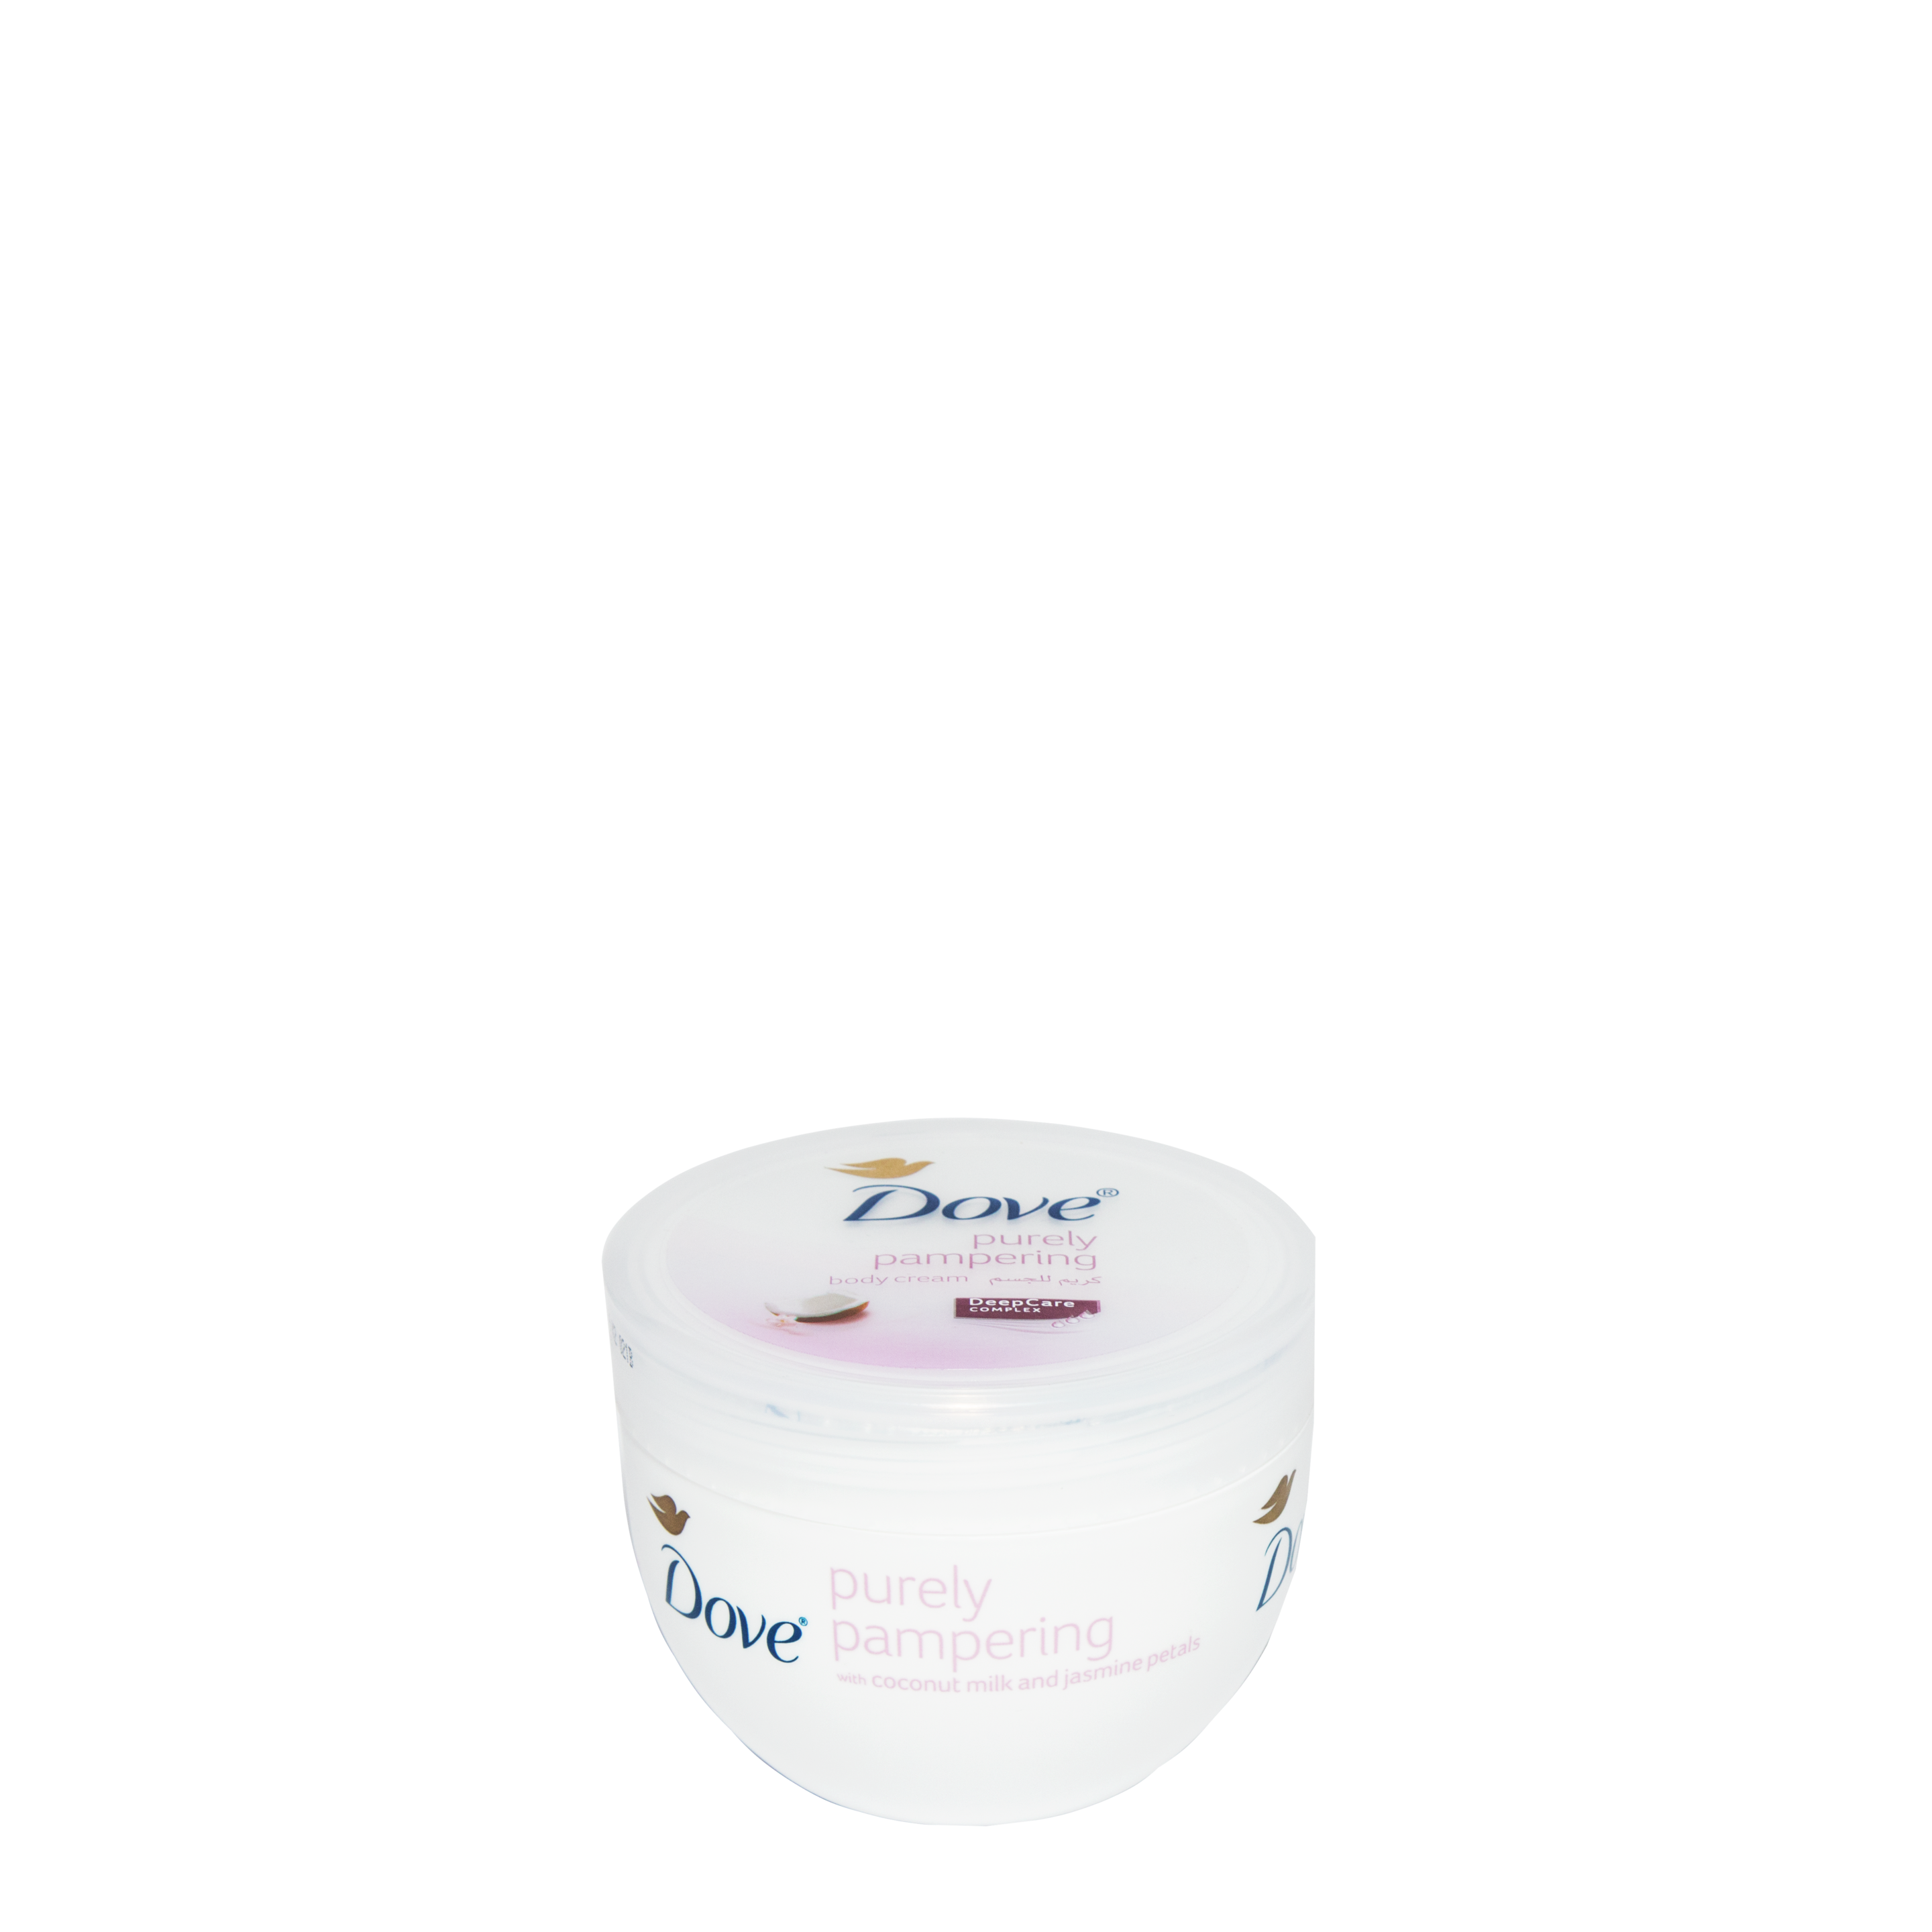 Dove Purely Pampering Coconut Nourishing Lotion 300g